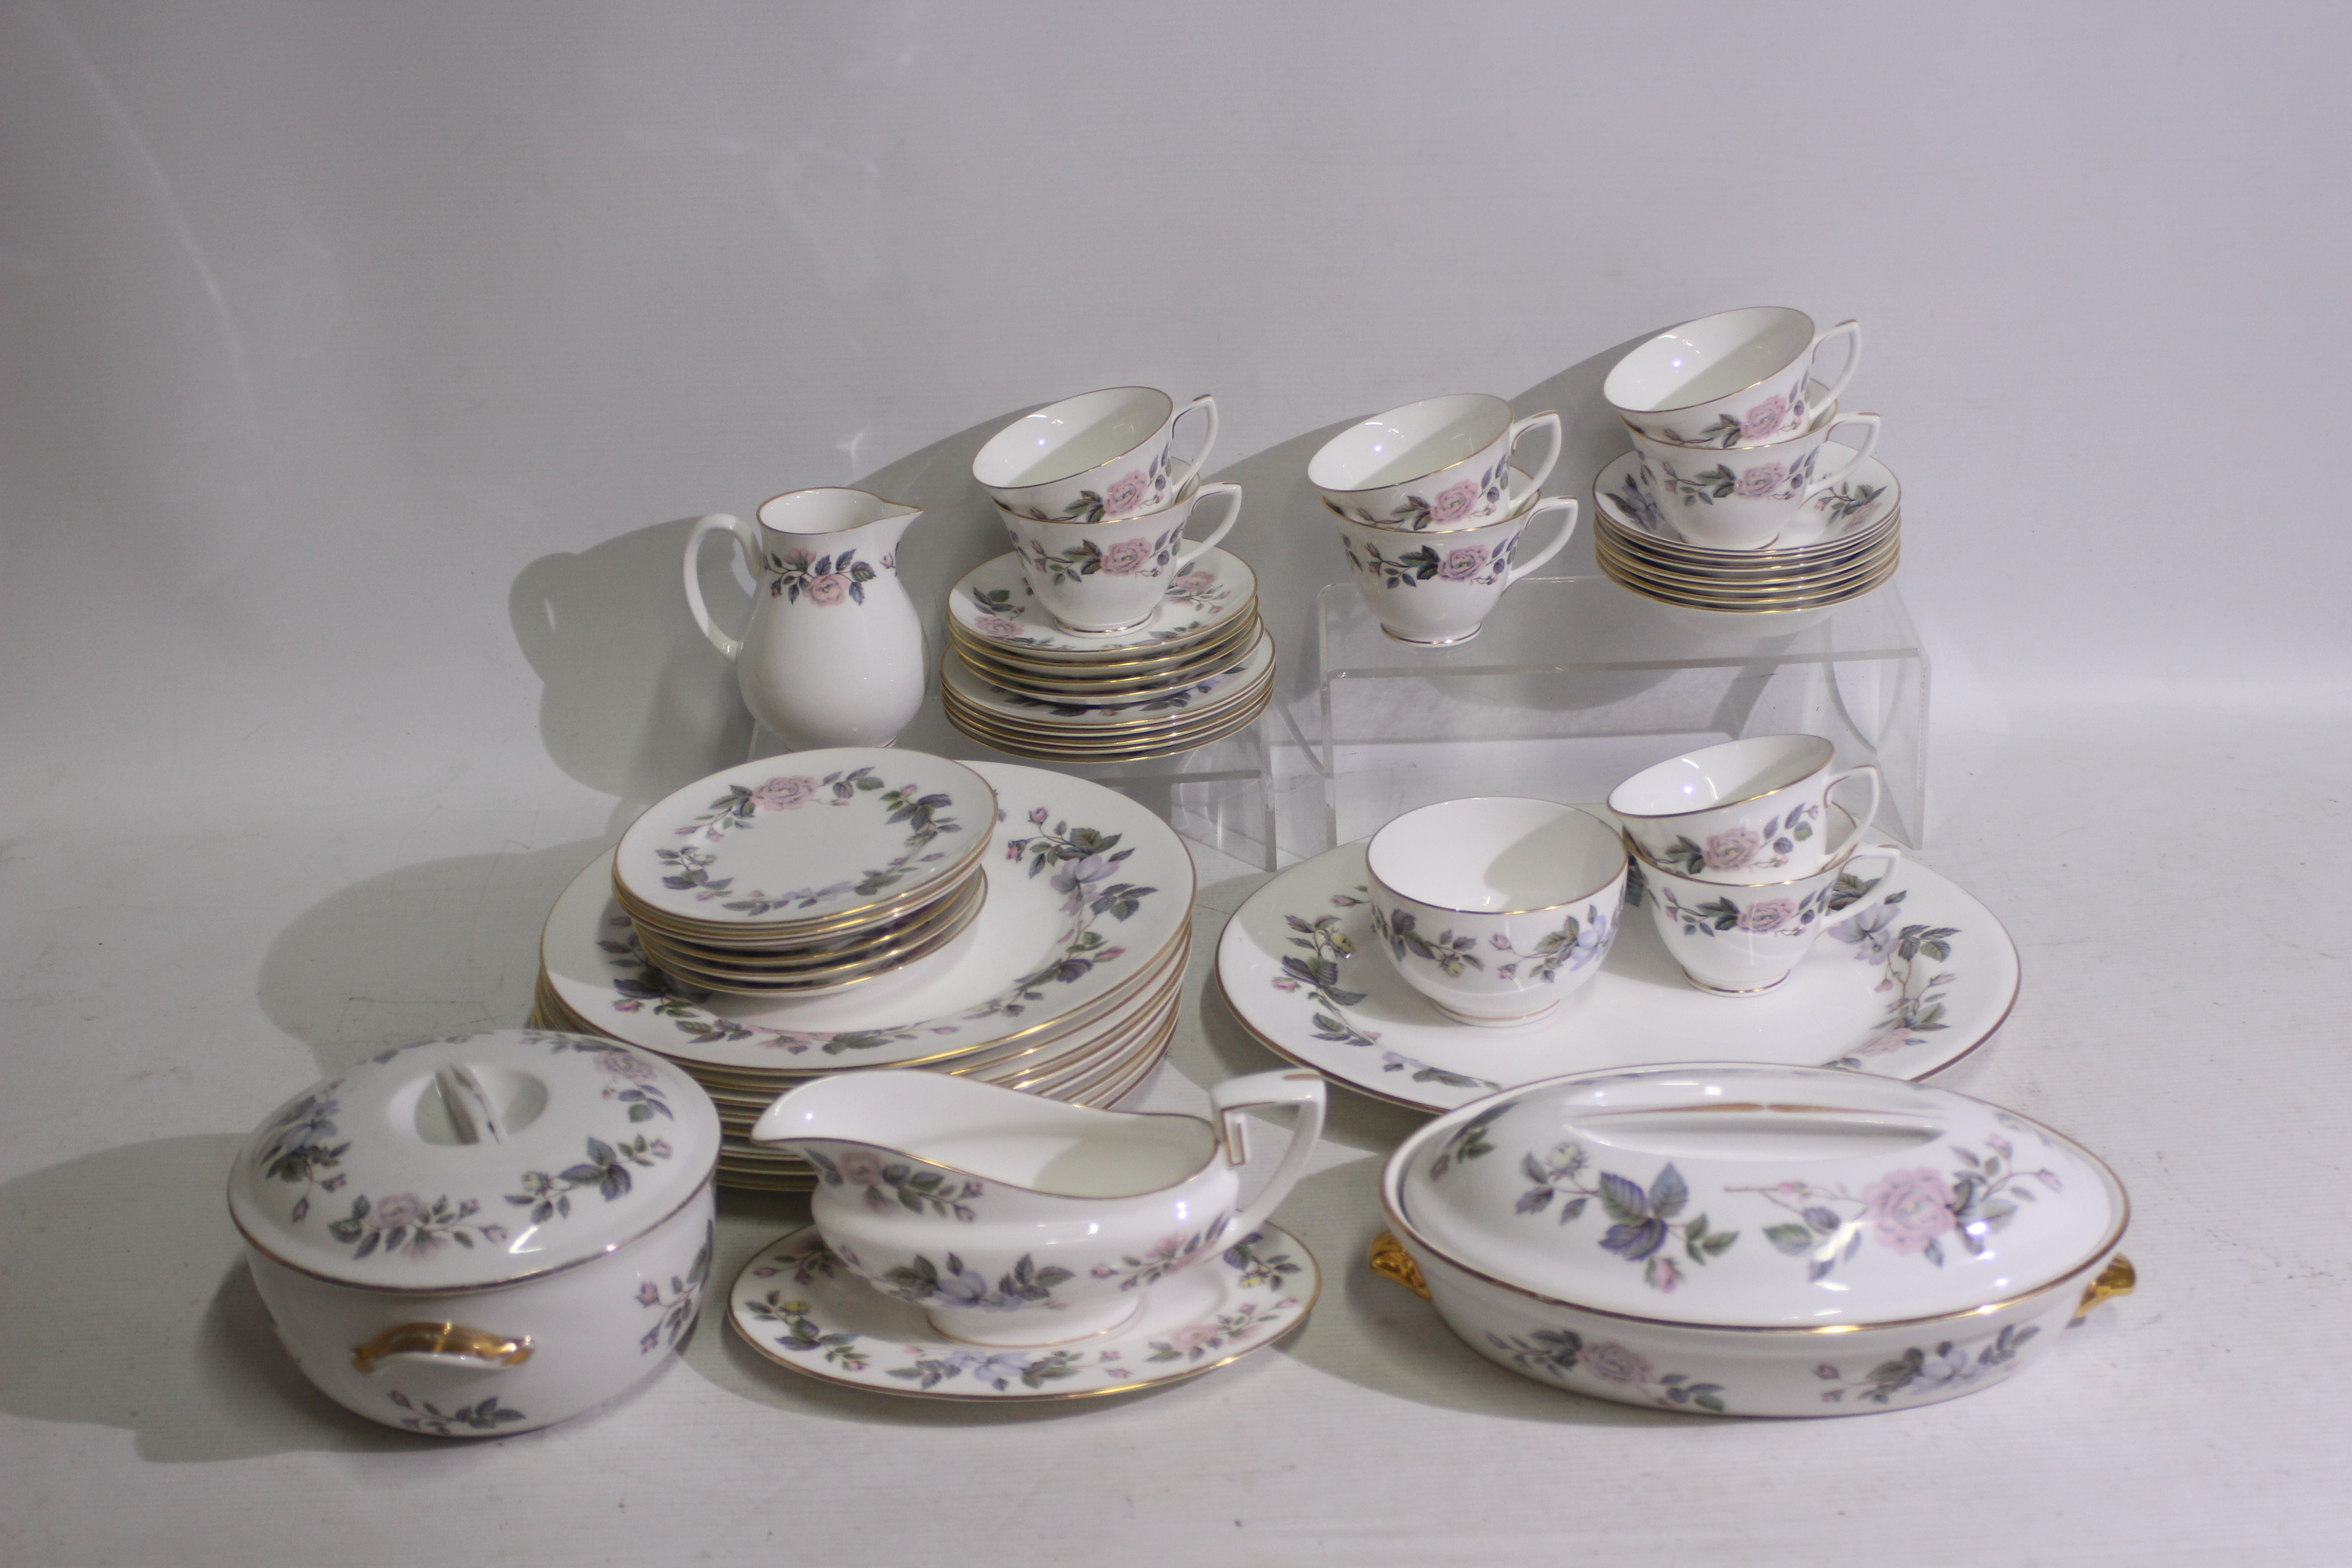 Royal Worcester - A collection of dinner and tea wares in the June Garland pattern, - Image 5 of 8